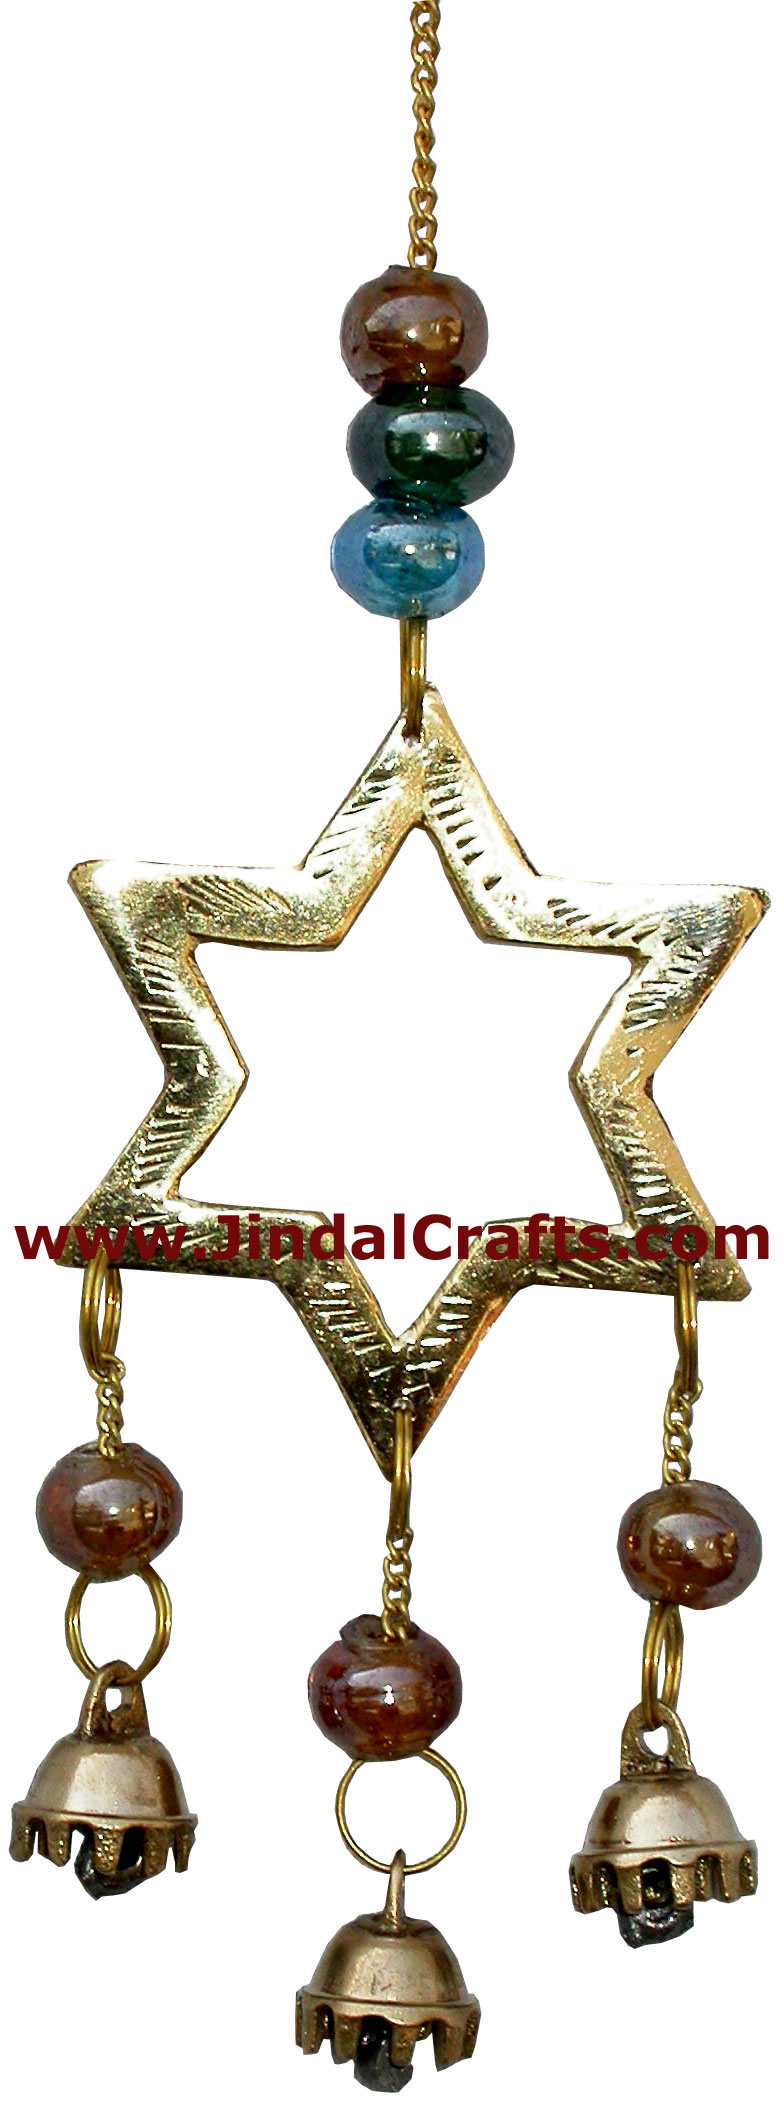 Brass Made Good Luck Home Decor Sun Moon Star Wind Chimes from India Handicrafts